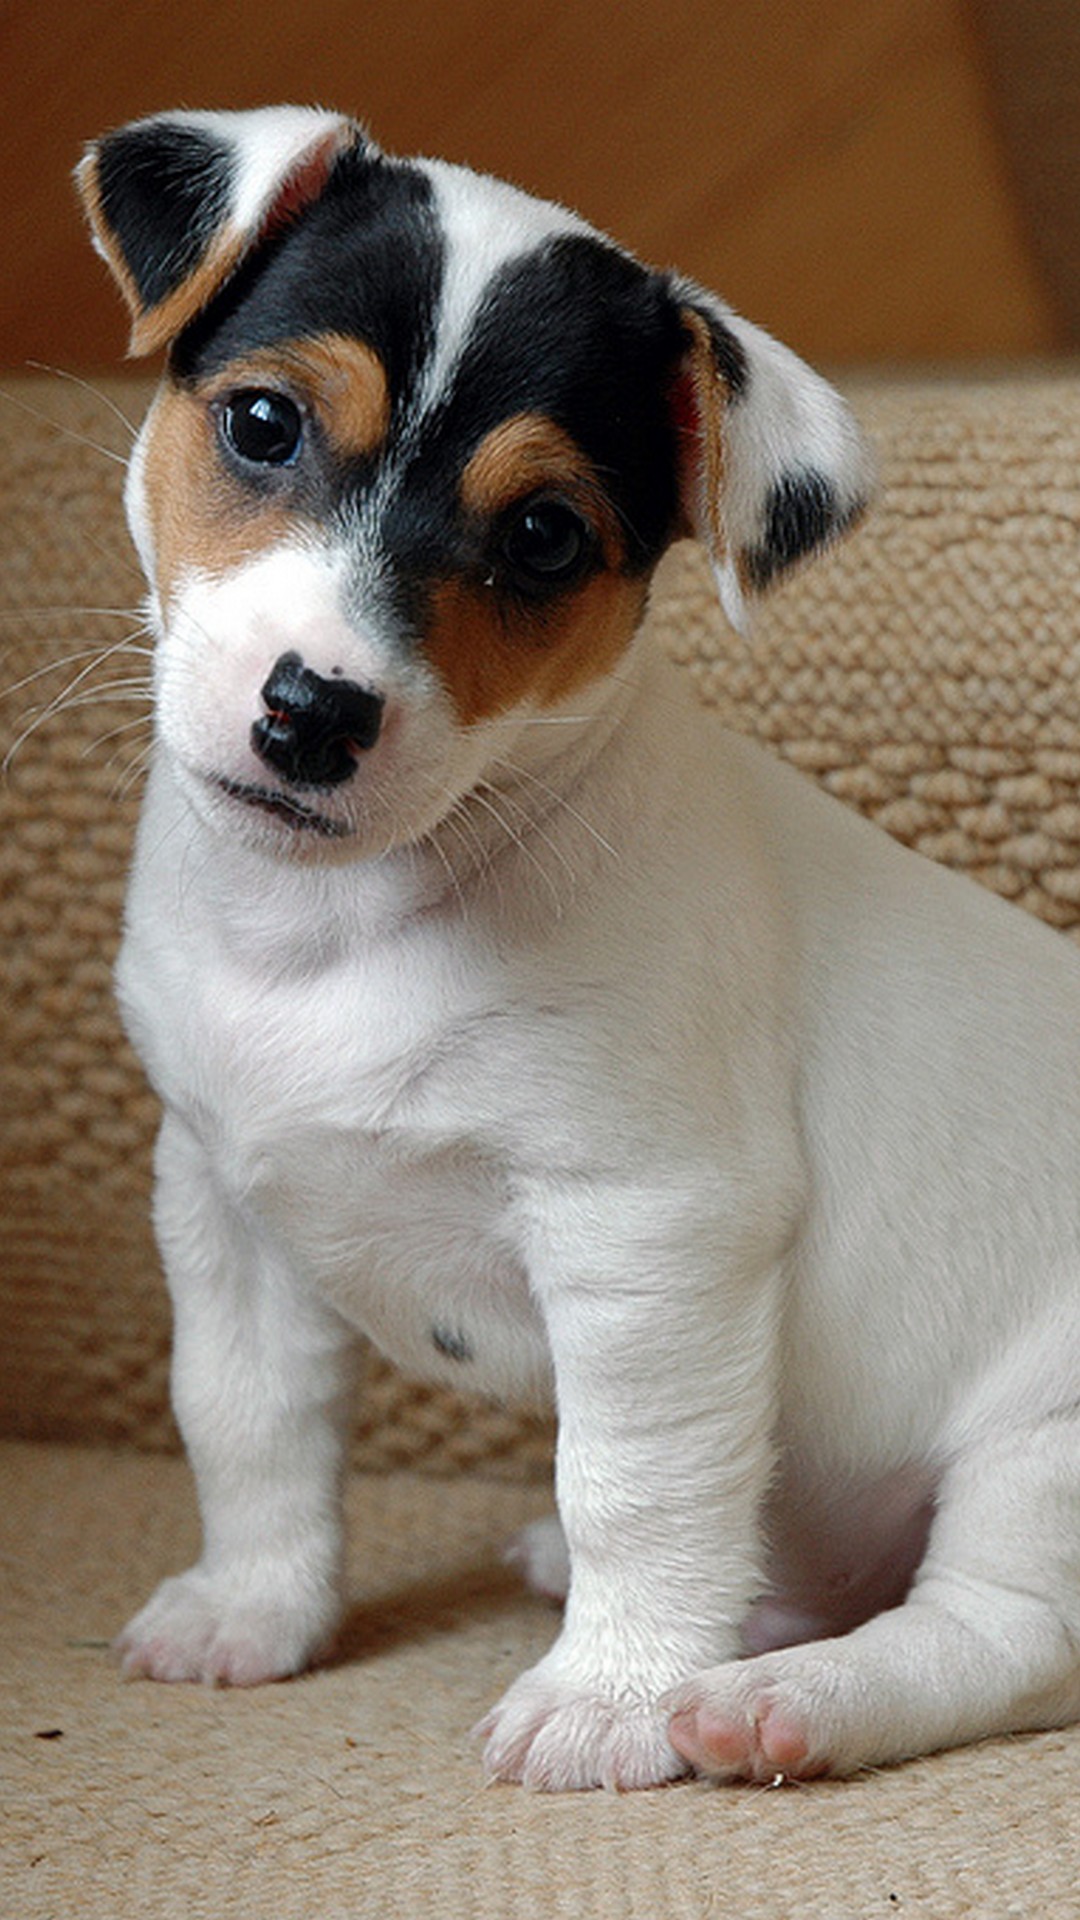 Cute Puppies Wallpaper For iPhone with HD Resolution 1080X1920